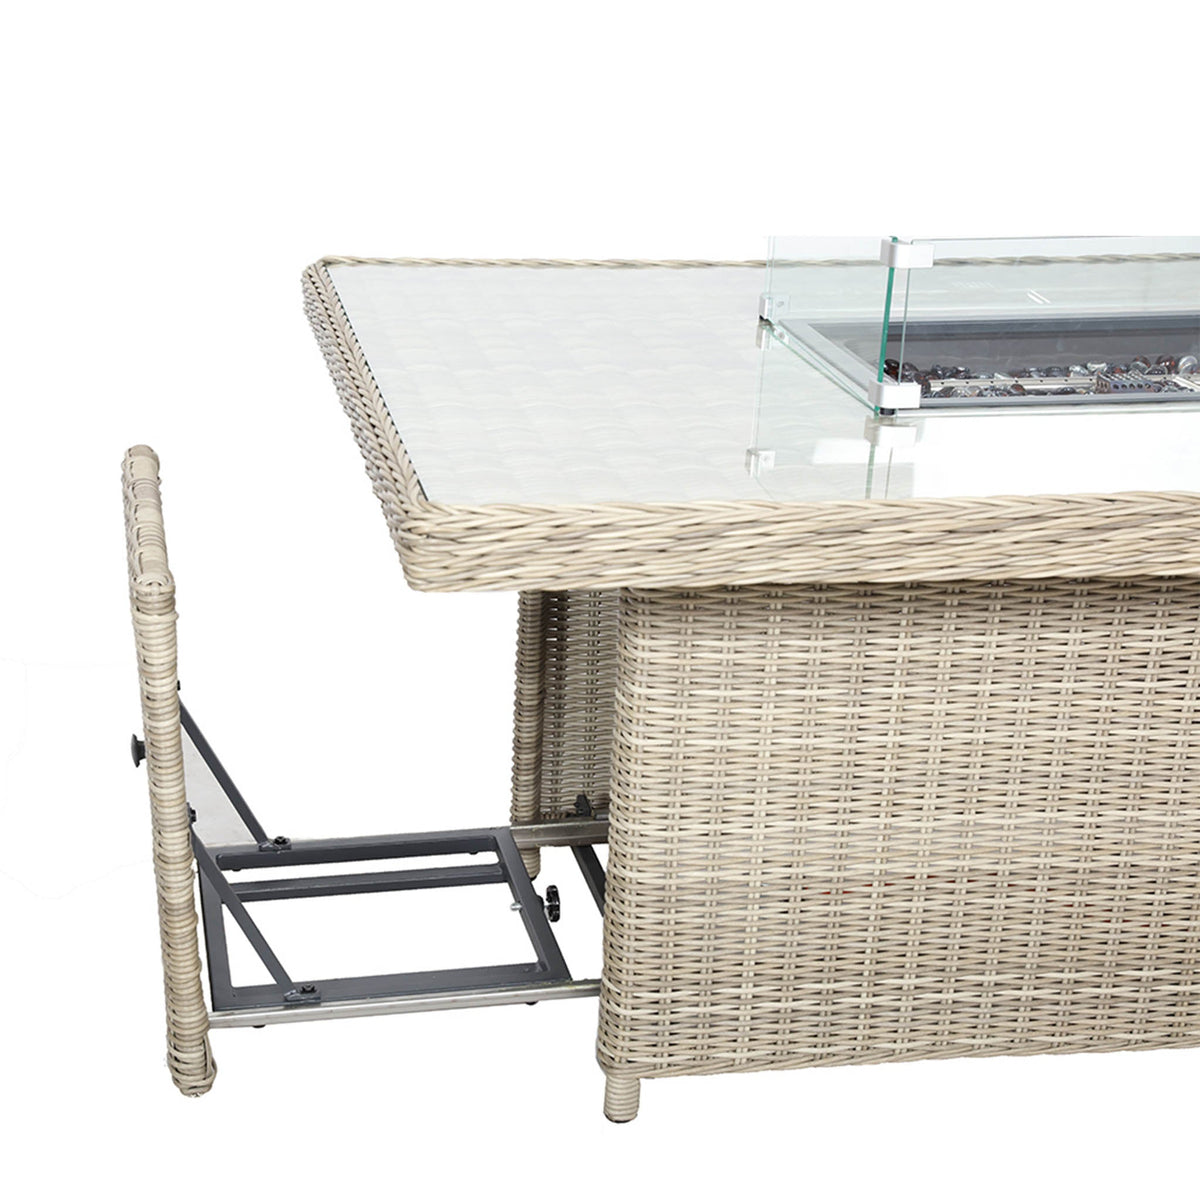 Wentworth Rattan 170cm Fire Pit Garden Dining Table & Lounge Set close up of under table gas compartment